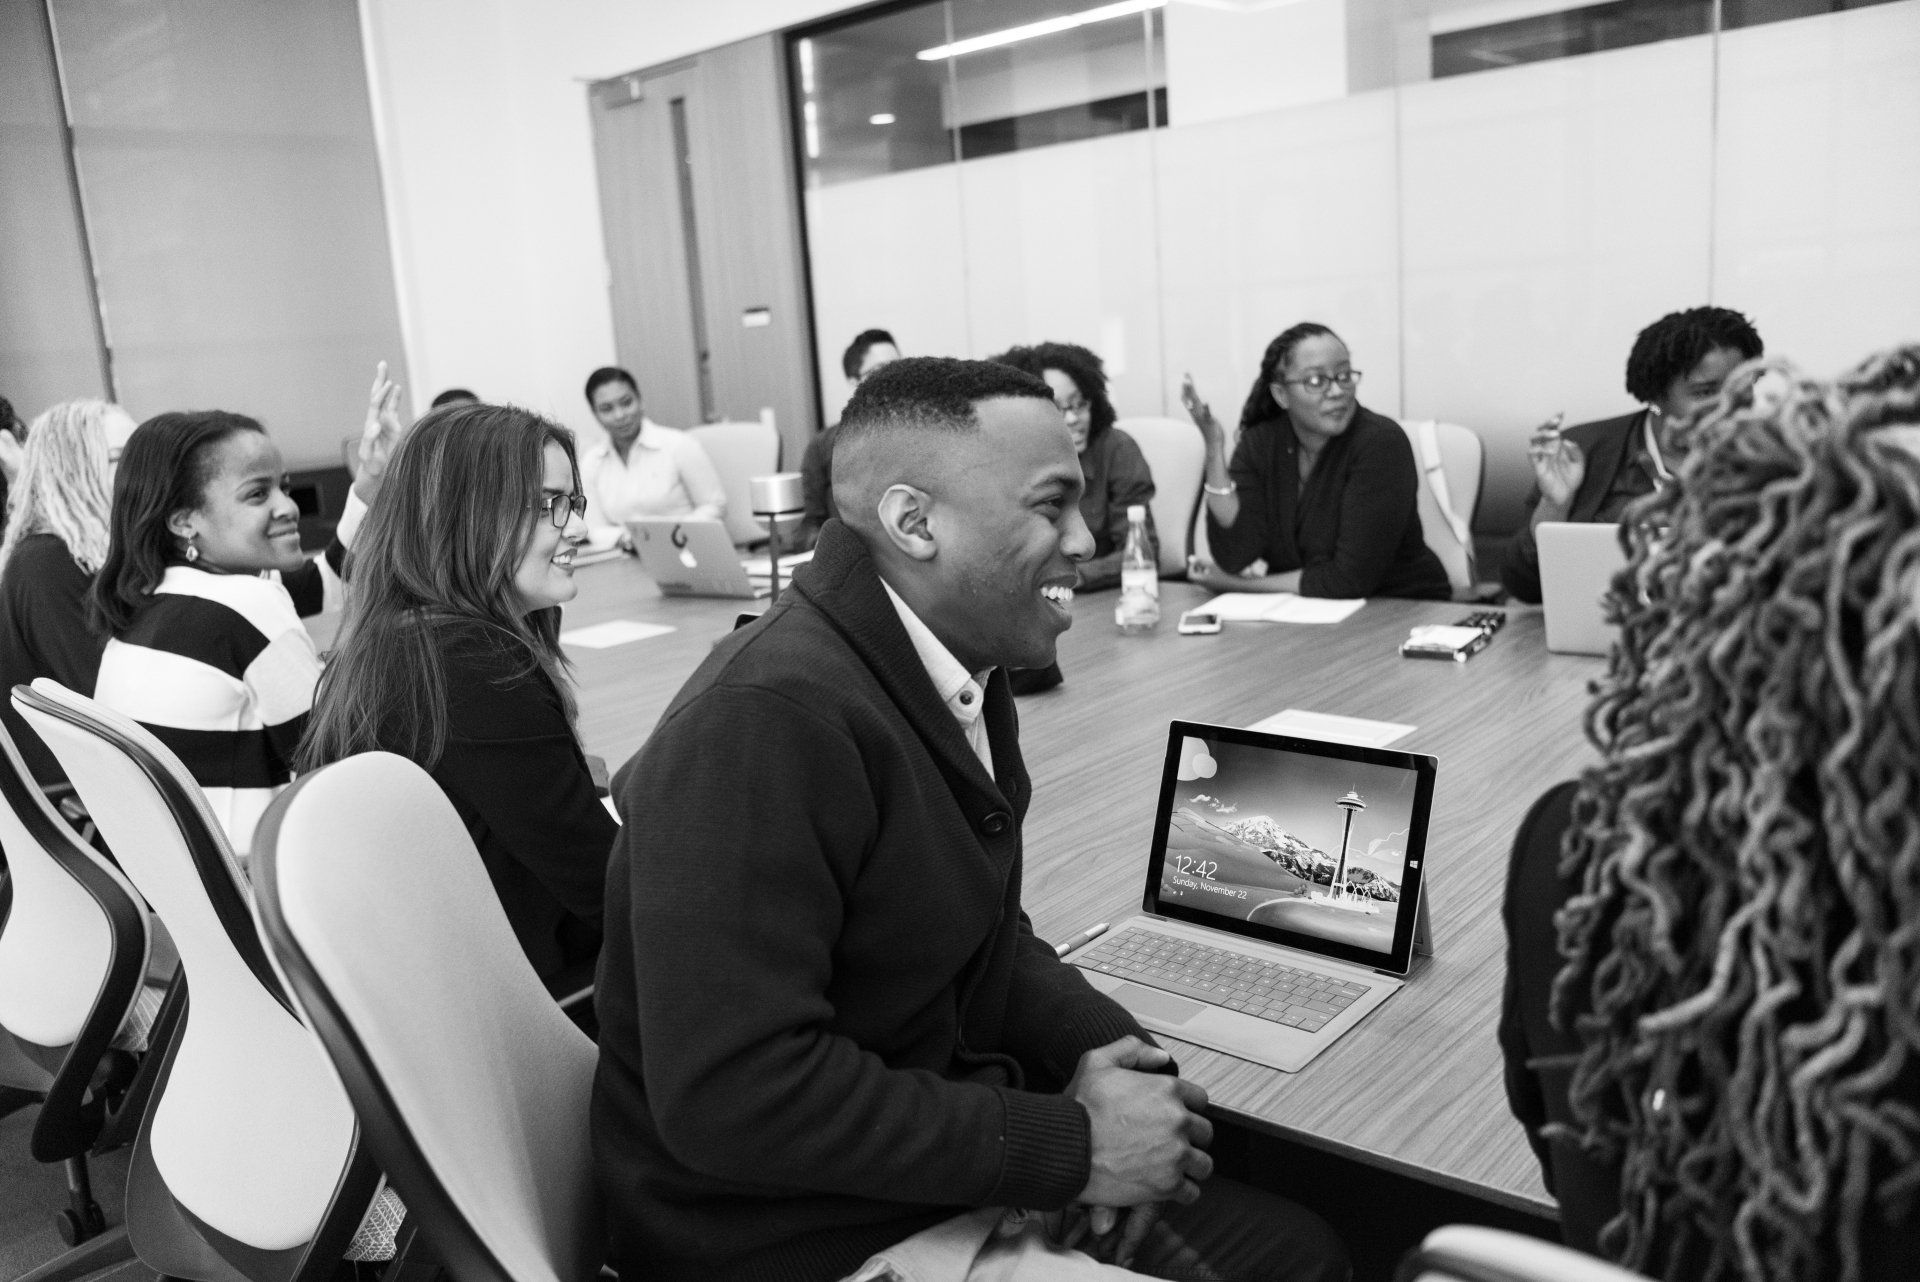 Black and white image of race, gender, age group of at least 10 people sitting around a conference table looking at/engaging with something or someone beyond the scope of the image